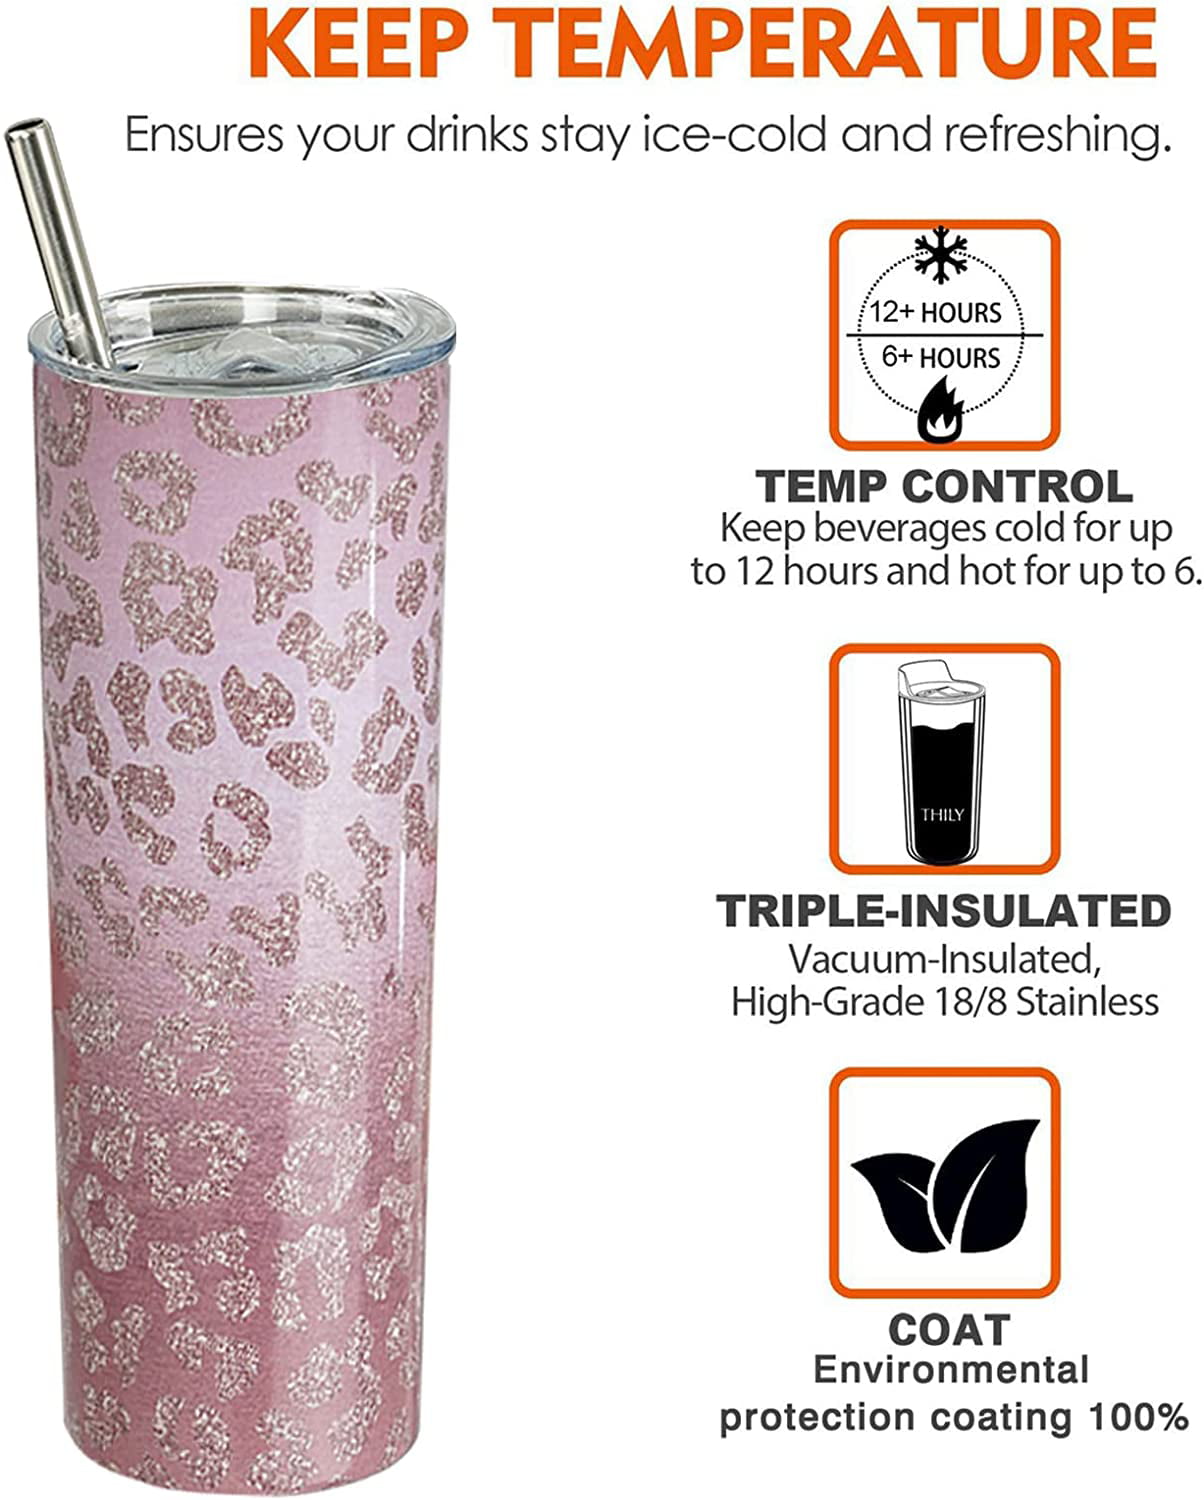 Mimorou 20 oz Leopard Print Tumbler Bulk with Lid and Straw, Skinny  Stainless Steel Travel Tumbler Insulated Coffee Mug with Cleaning Brush for  Hot an for Sale in Chino, CA - OfferUp